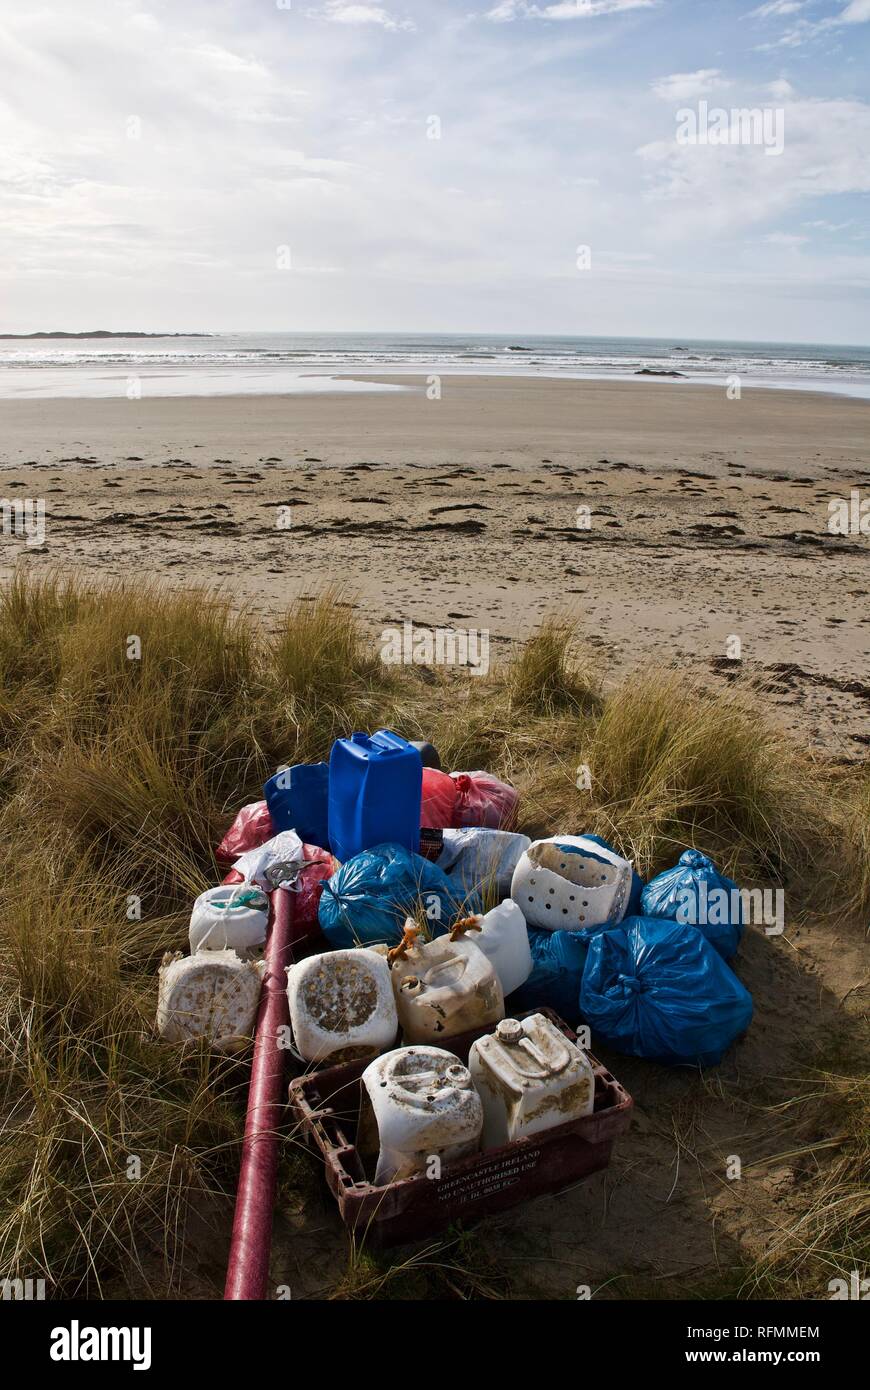 A beach collection of plastic waste and pollution washed up on a beach in Rhosneigr, Anglesey, North Wales, UK Stock Photo